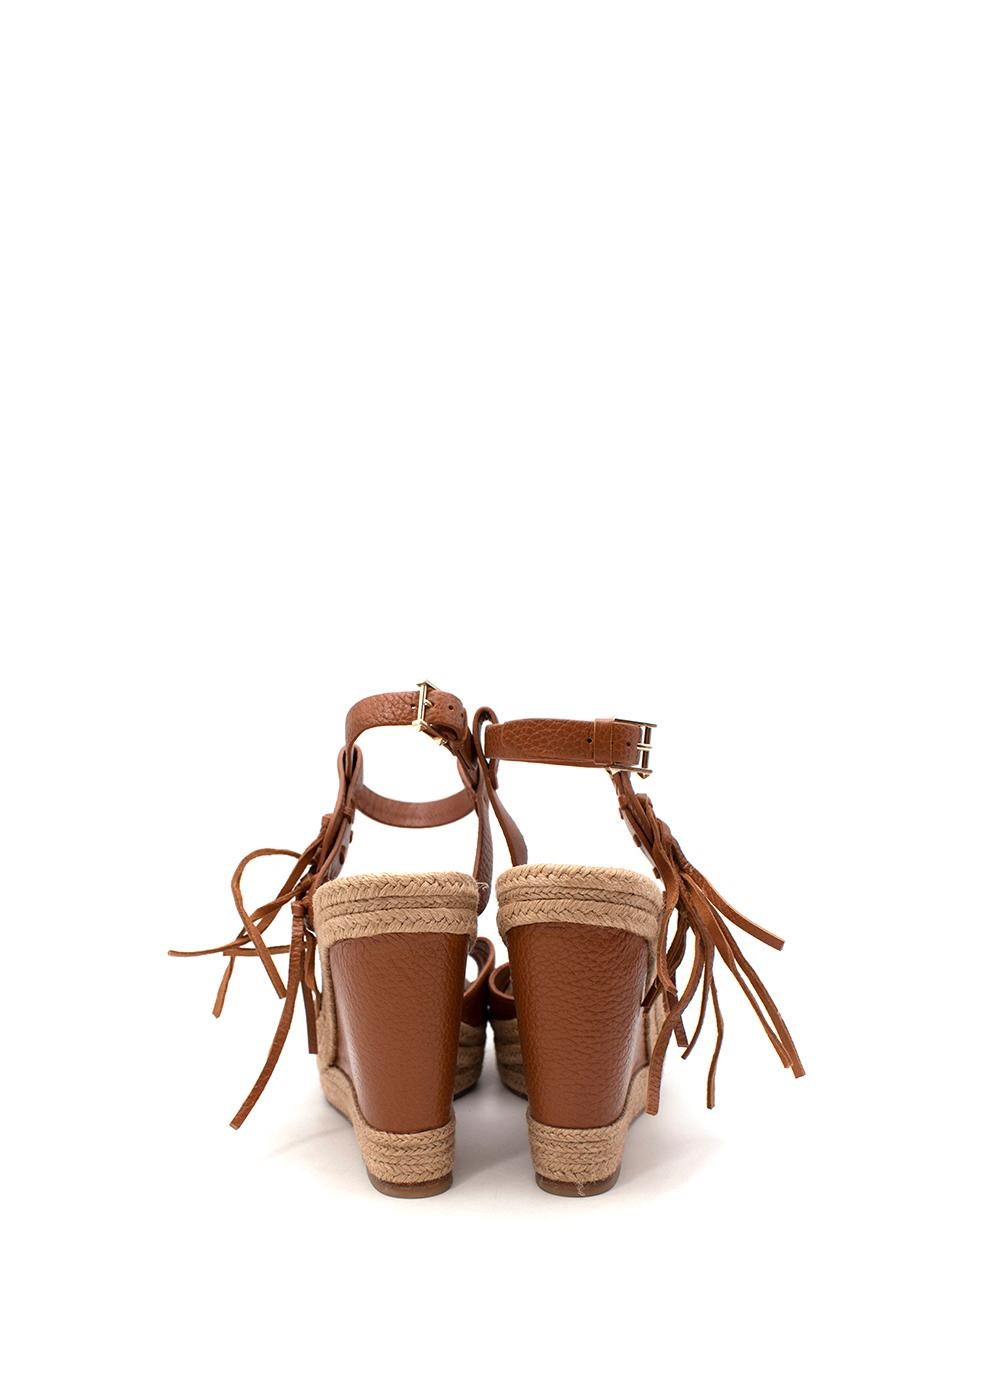 Tan Leather & Jute Wedge Heeled Espadrille Sandals In New Condition For Sale In London, GB